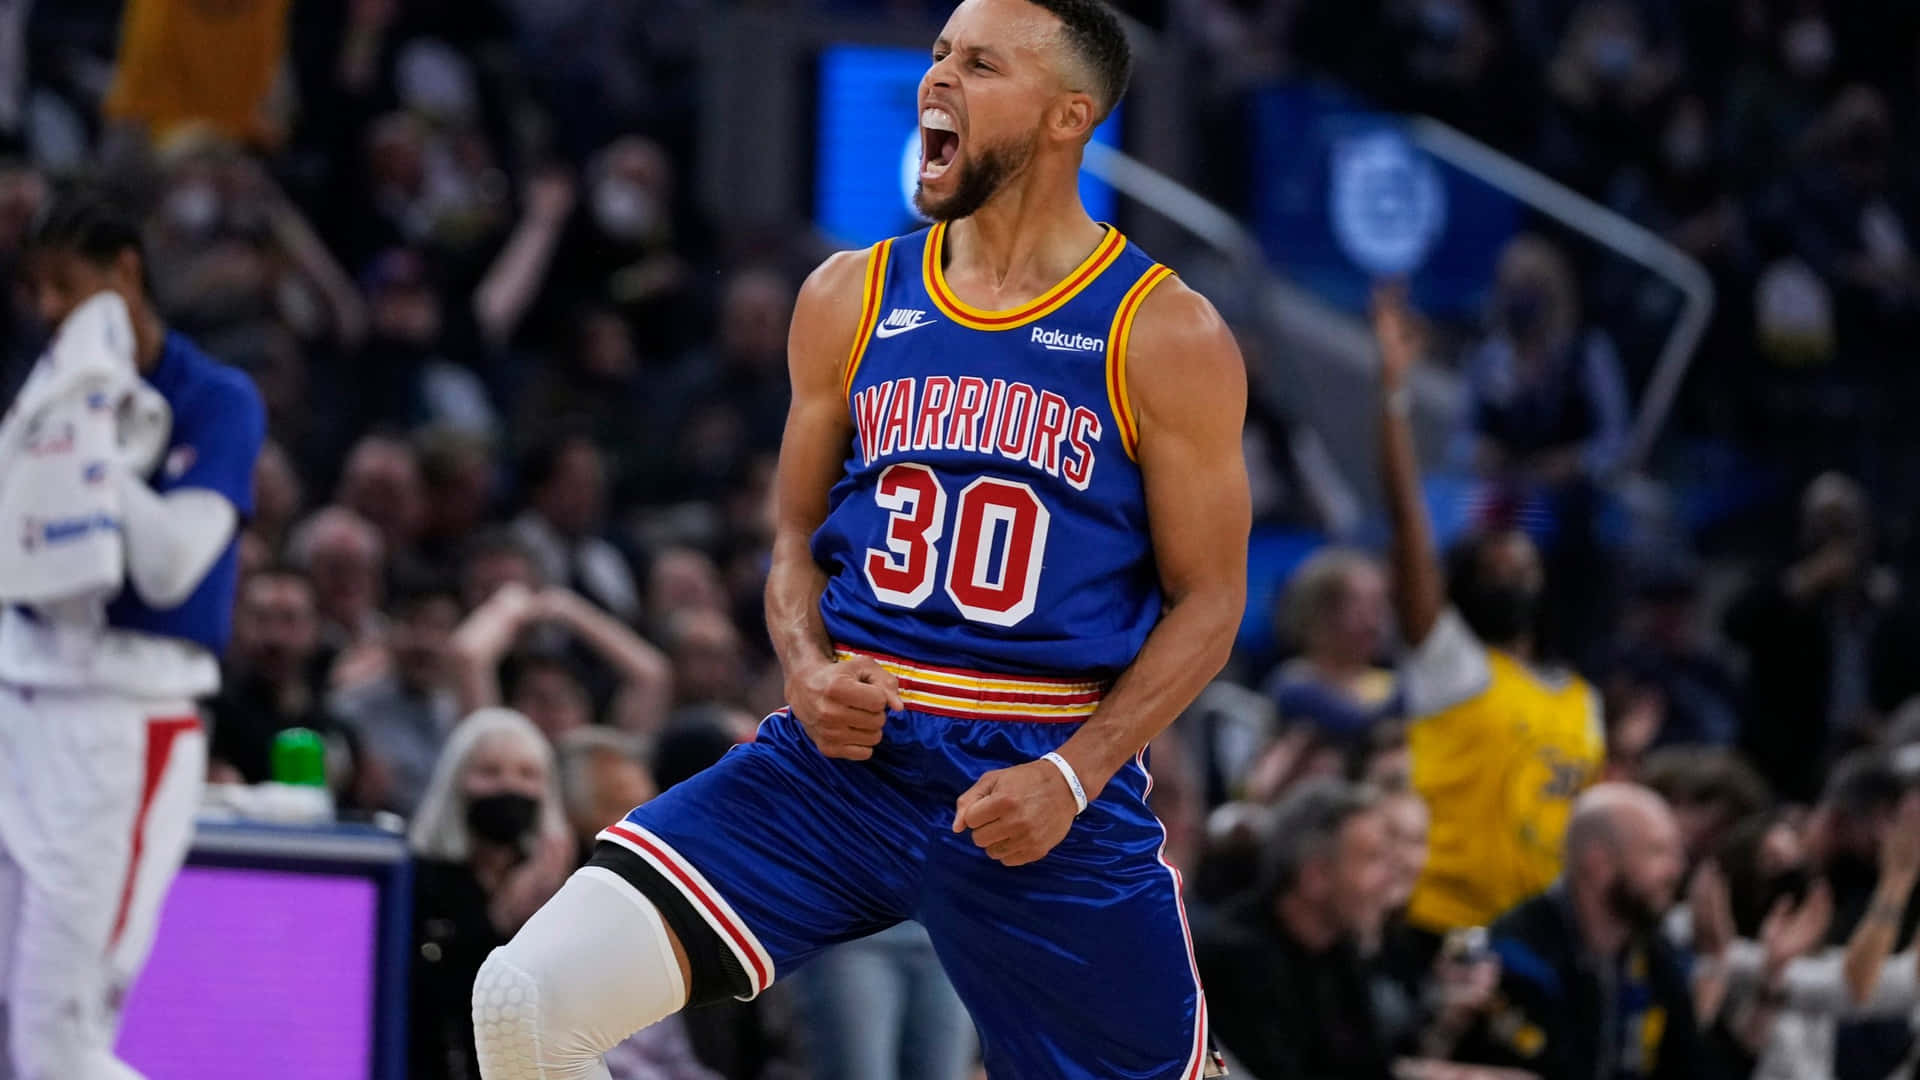 Three-time NBA Champion and 6-time All-Star Stephen Curry